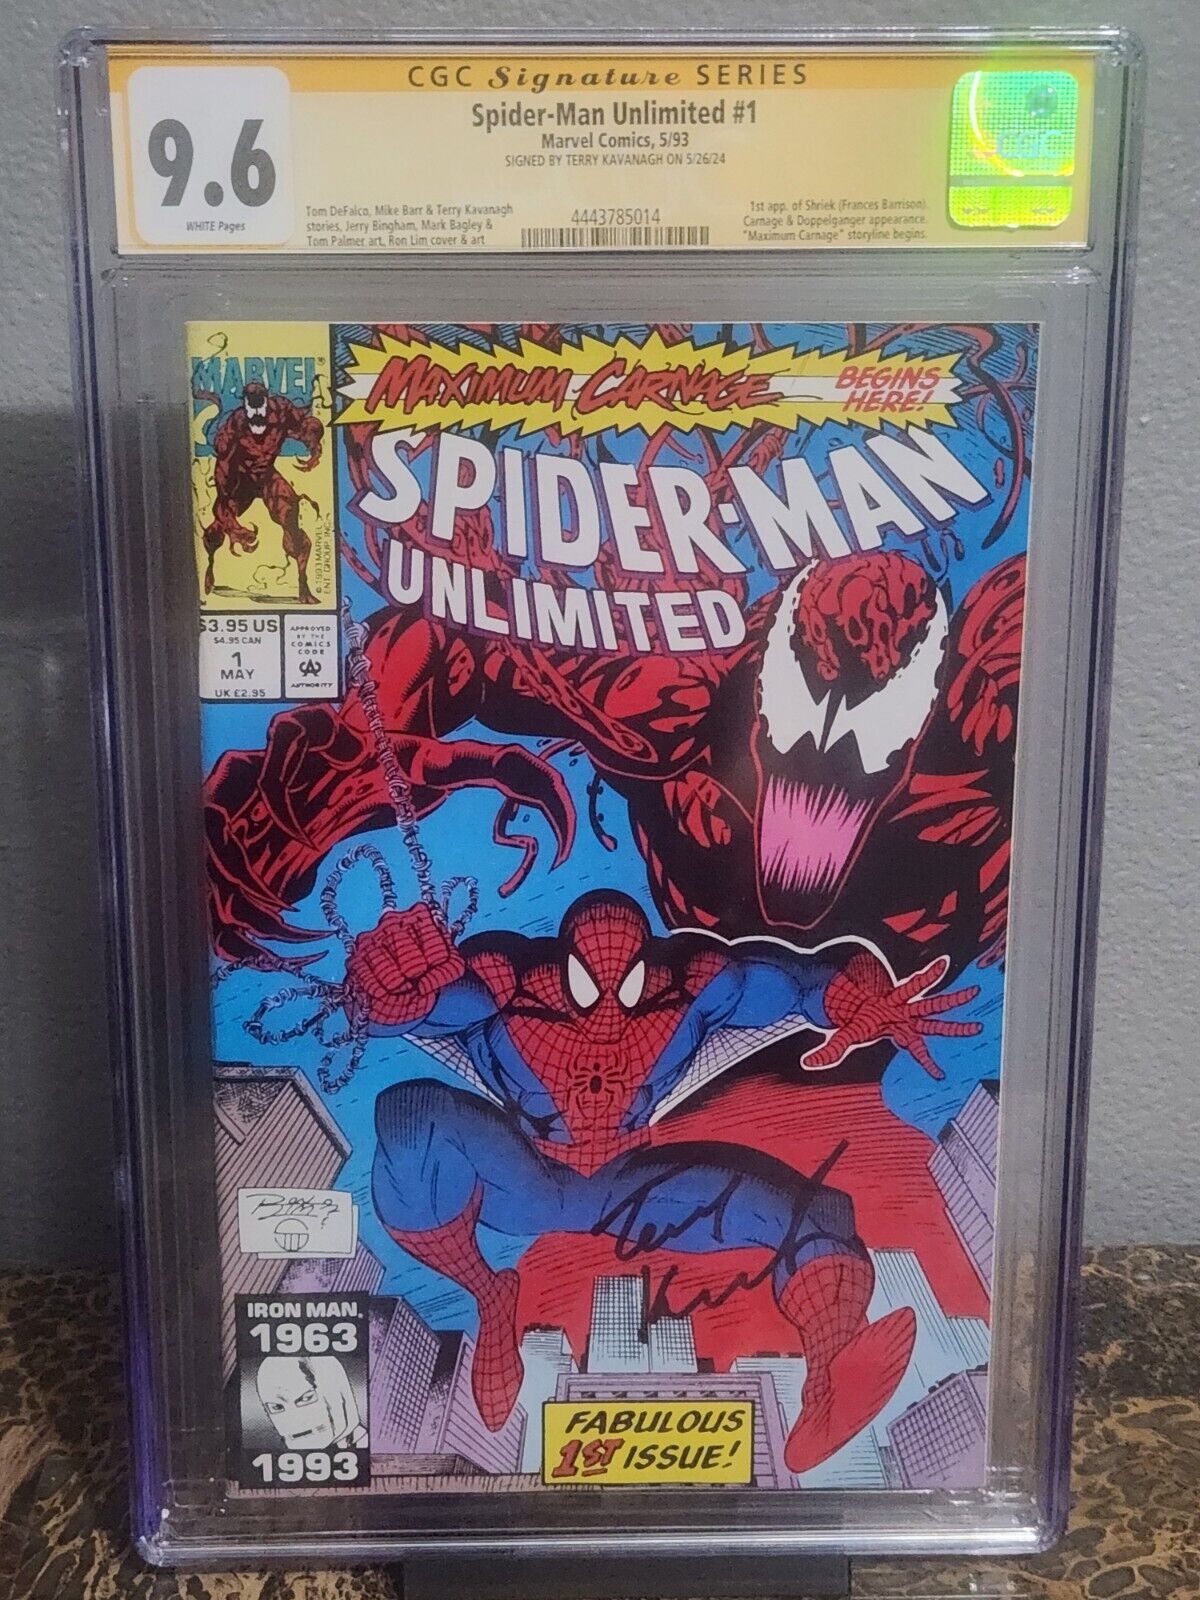 spider-man unlimited #1 Signed By Terry Kavanagh CGC Signature Series